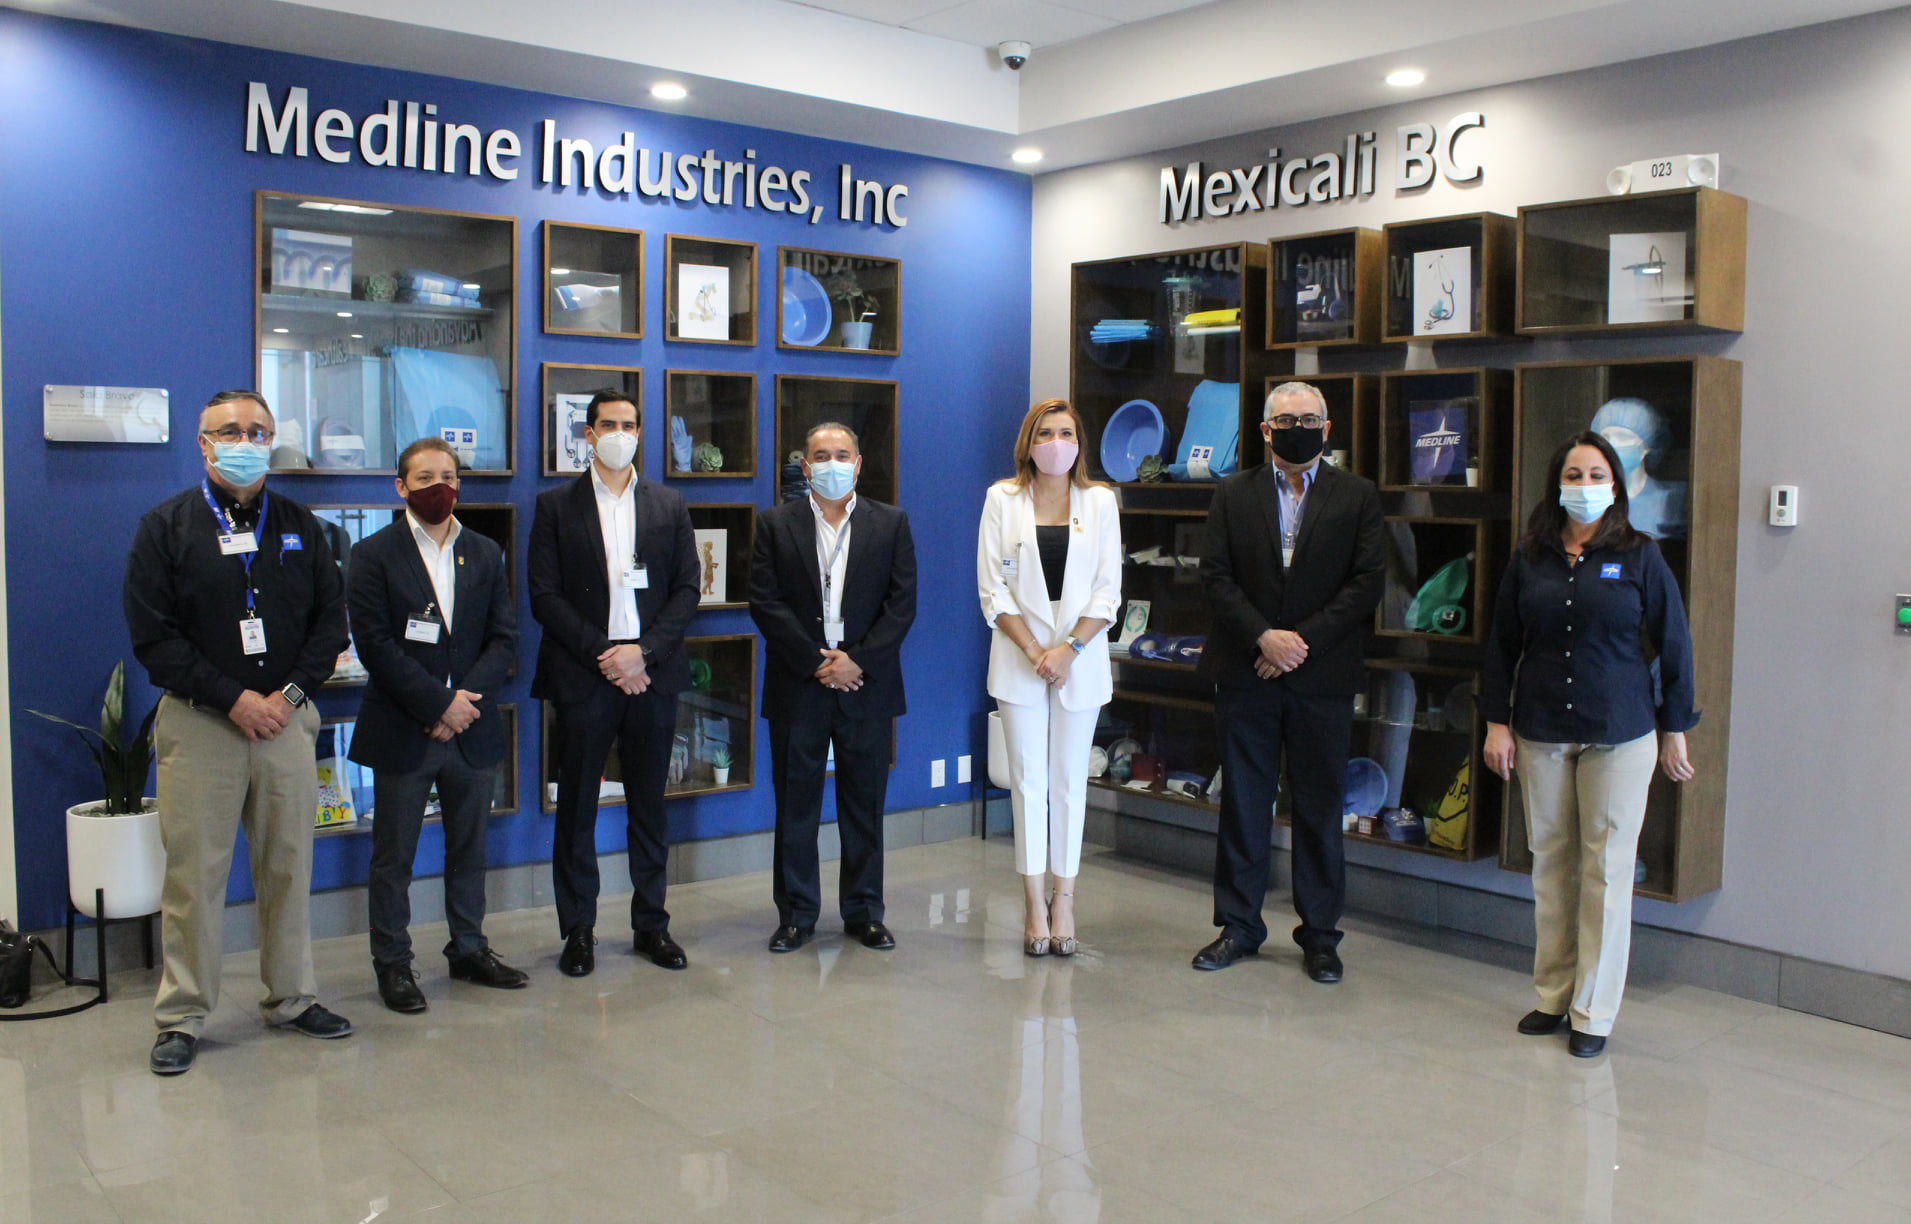 Medline Industries announces $ 50 million investment in Mexicali